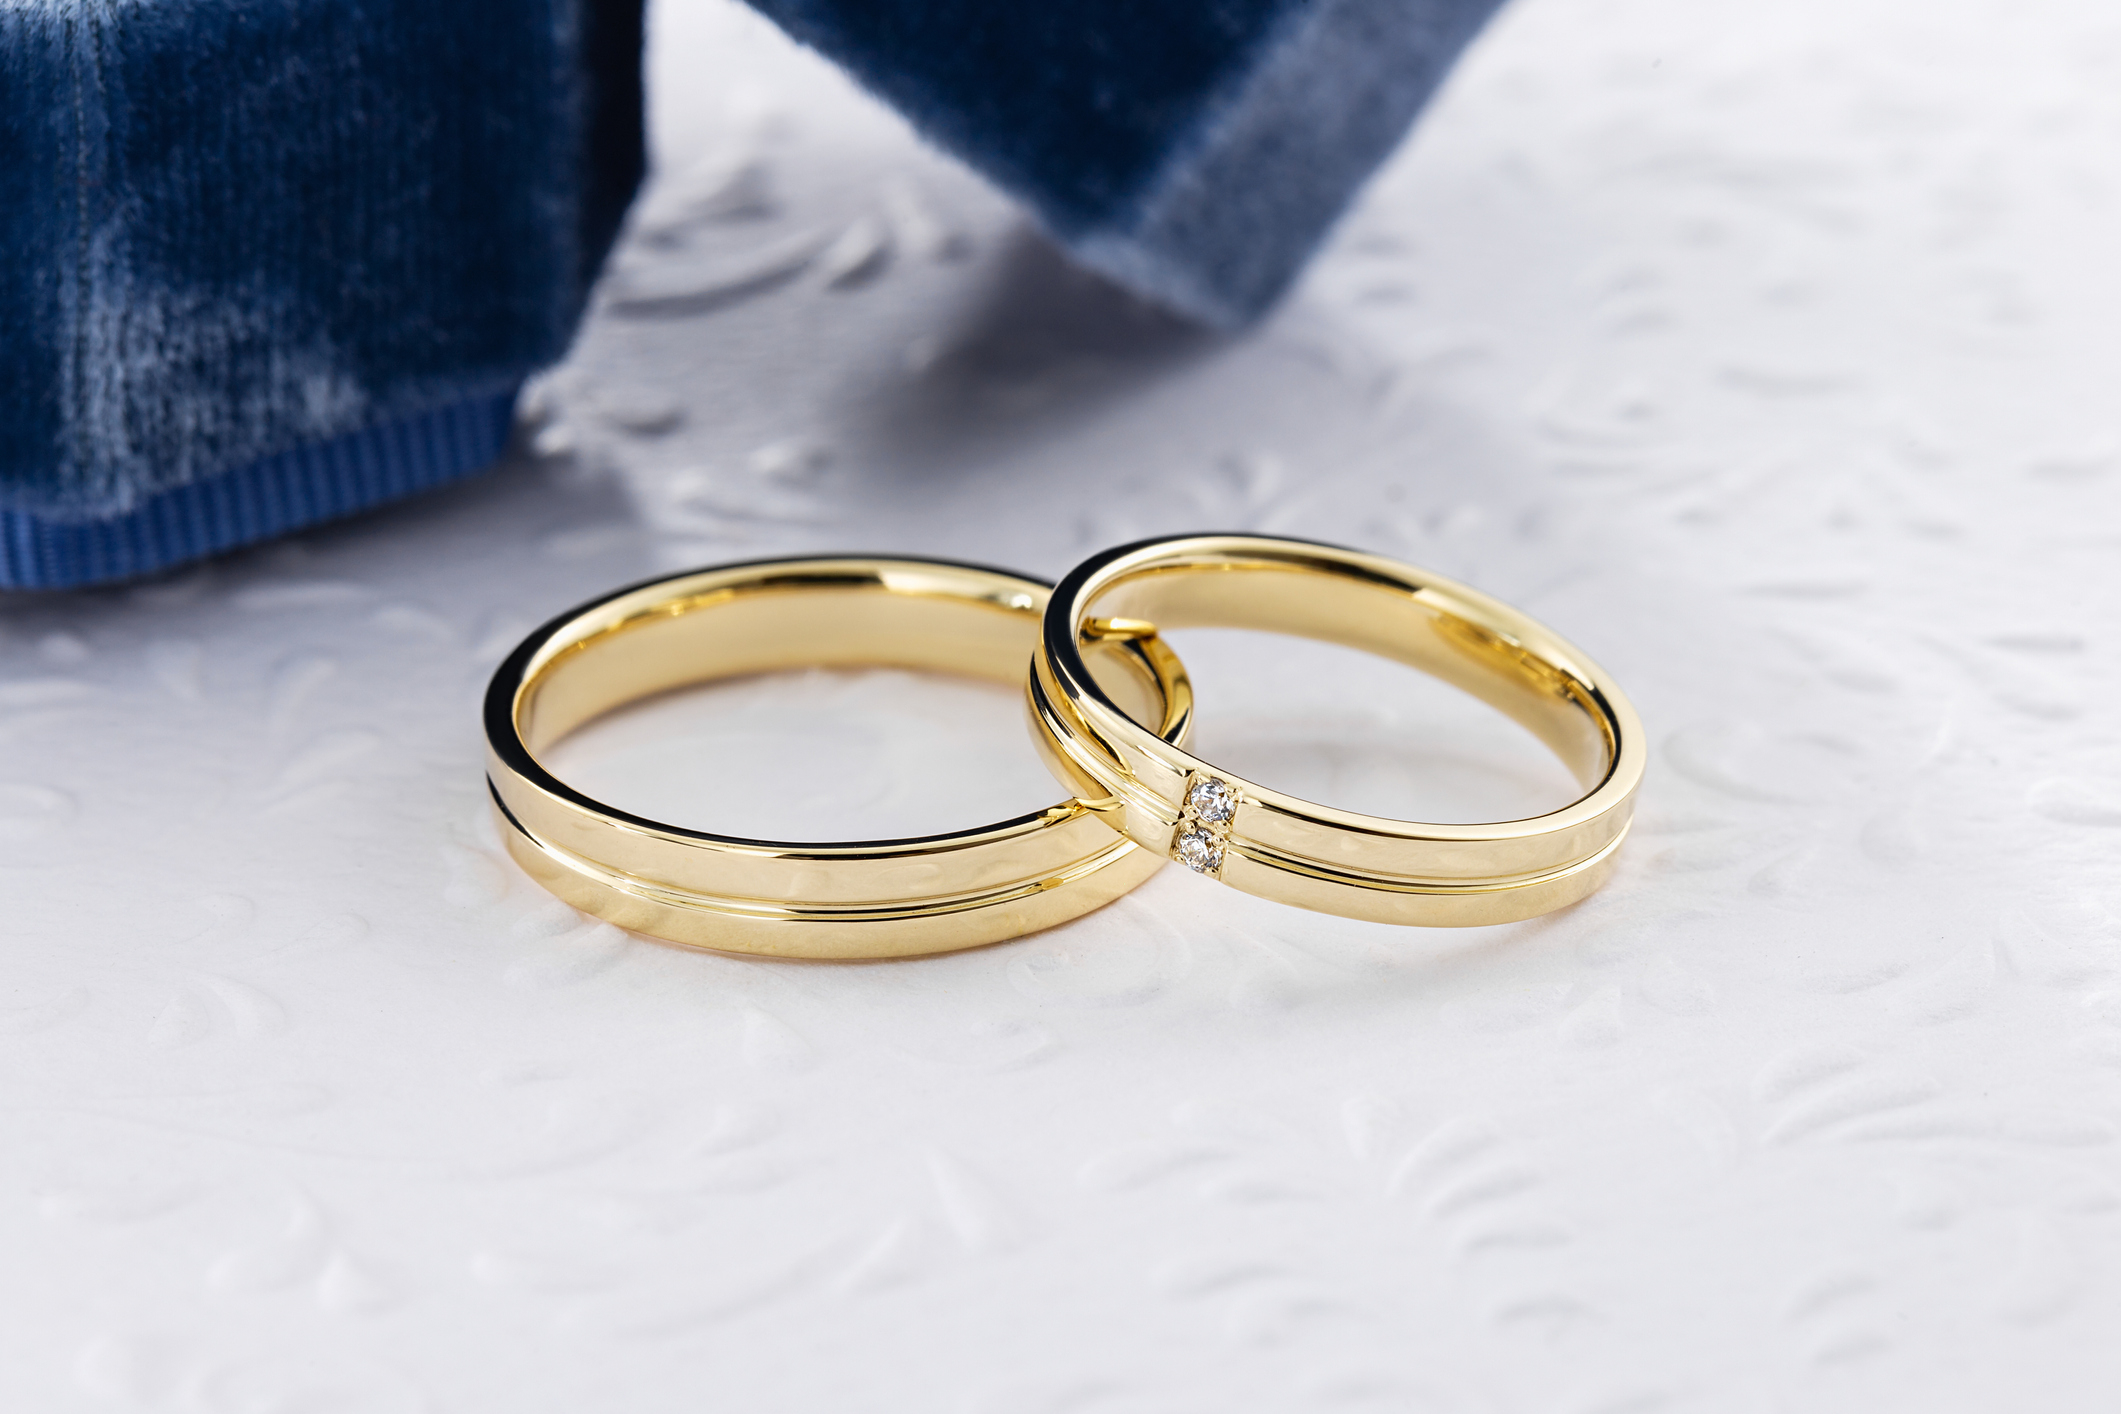 Two gold wedding bands overlapping each other on a textured surface, symbolizing union